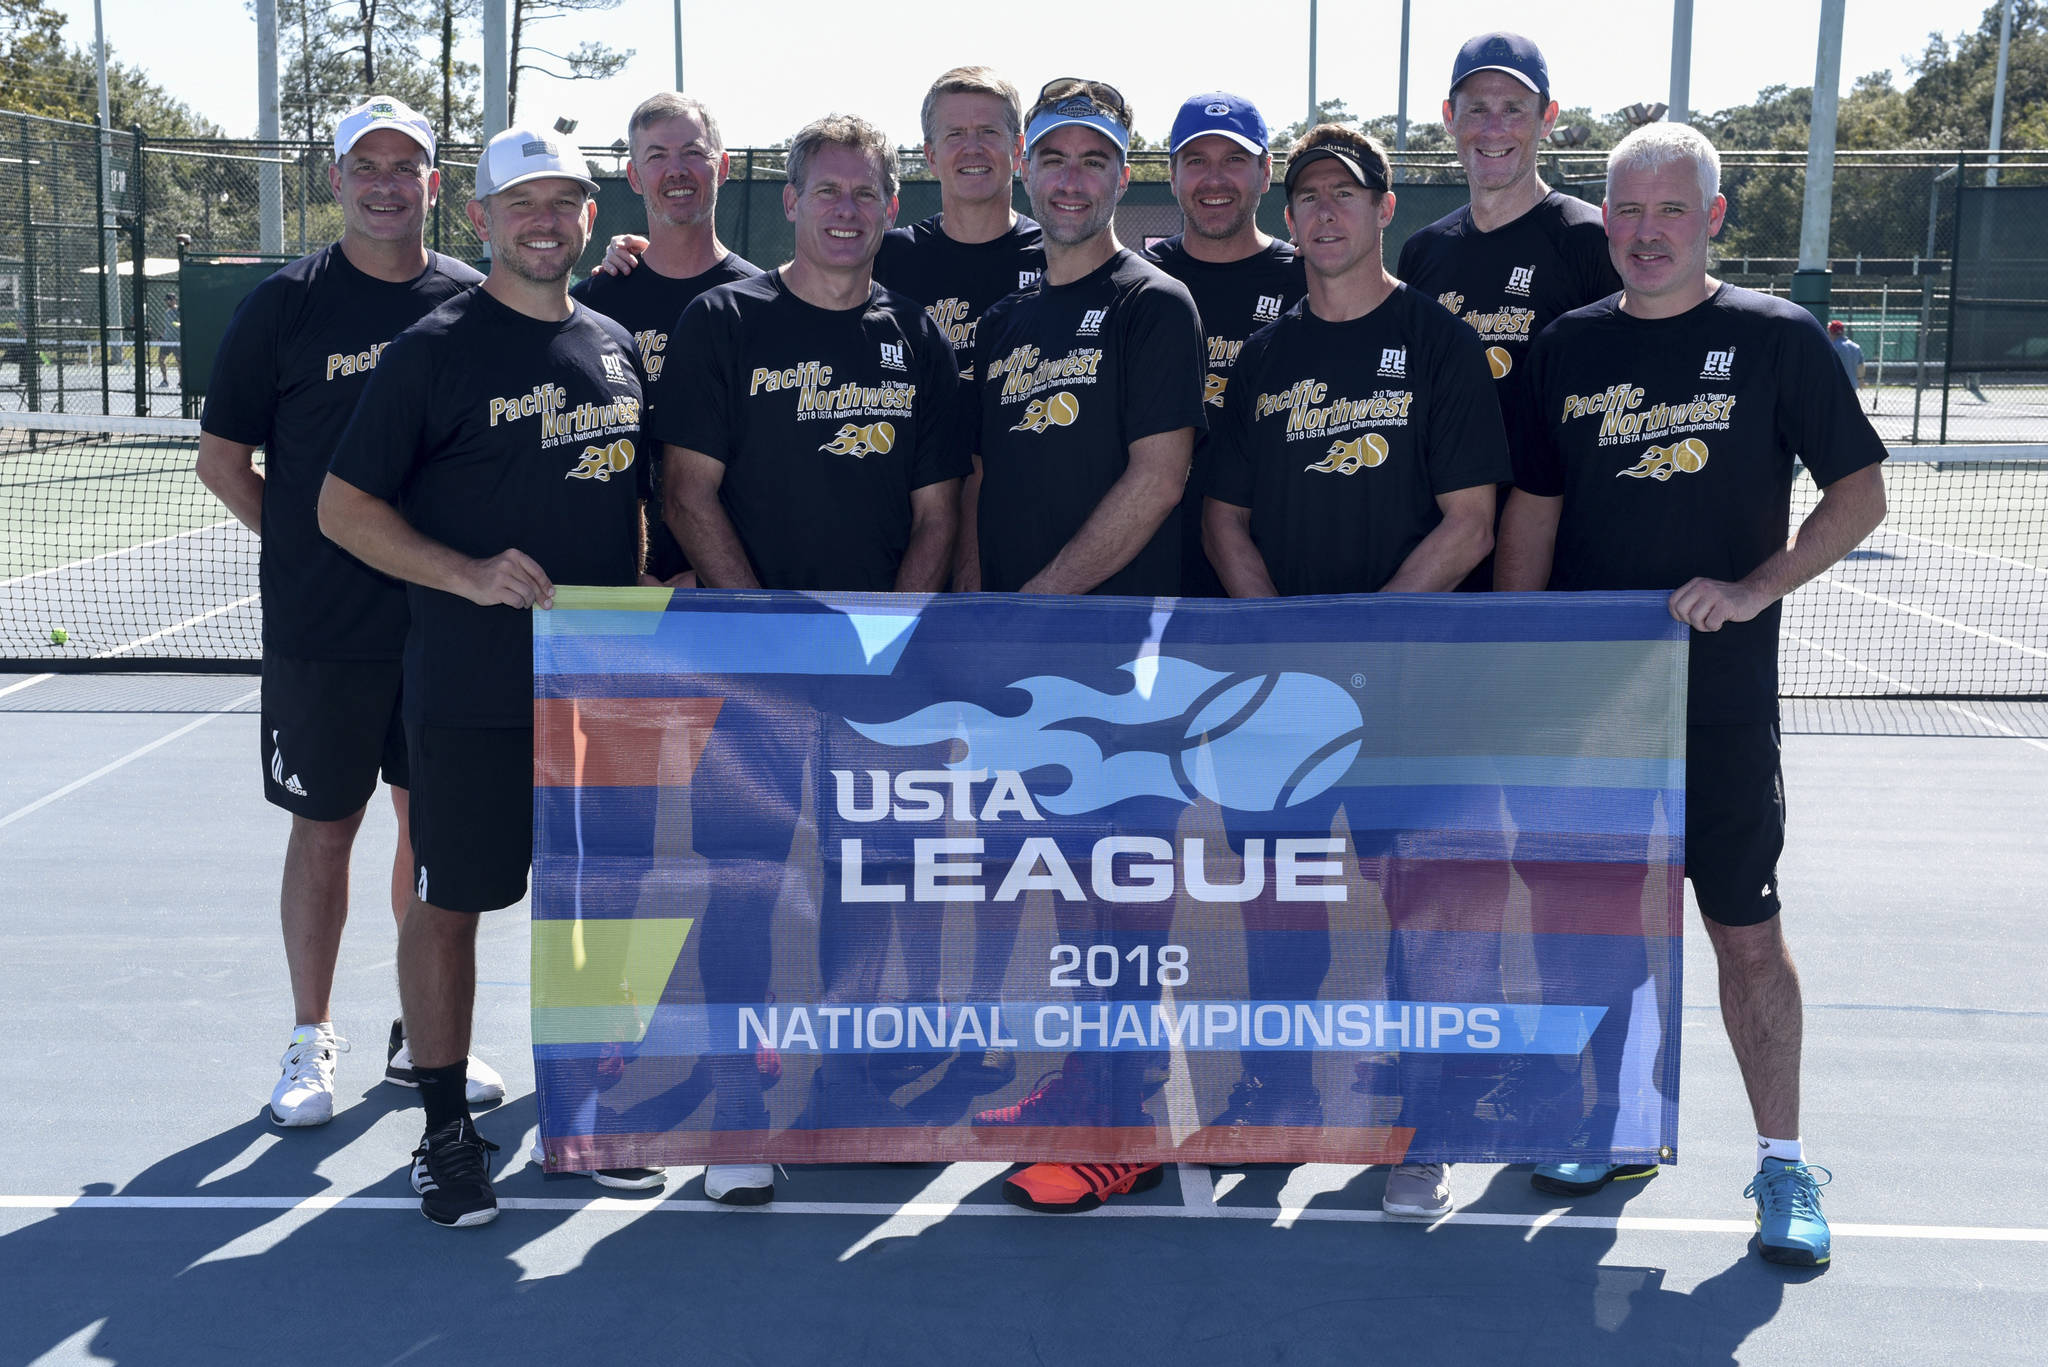 A Mercer Island based tennis team, representing the United States Tennis Association (USTA) Pacific Northwest Section, captured the national title at the USTA League 40 Over 3.0 Men’s National Championships on Oct. 28 at the Copeland-Cox Tennis Center in Mobile, Alabama. The Mercer Island team, which is based out of of the Mercer Island Country Club, defeated a squad from San Francisco, California 3-2 in the title match. Members of the Mercer Island squad consisted of John Whipple, Bernard Hensey, Brian Rogers, Christopher Loiselle, Christopher Martin, Dean Martin, Dean Winston, Jeff Omara, Richard Aylen and Ryan Flynn. Photo courtesy of the United States Tennis Association